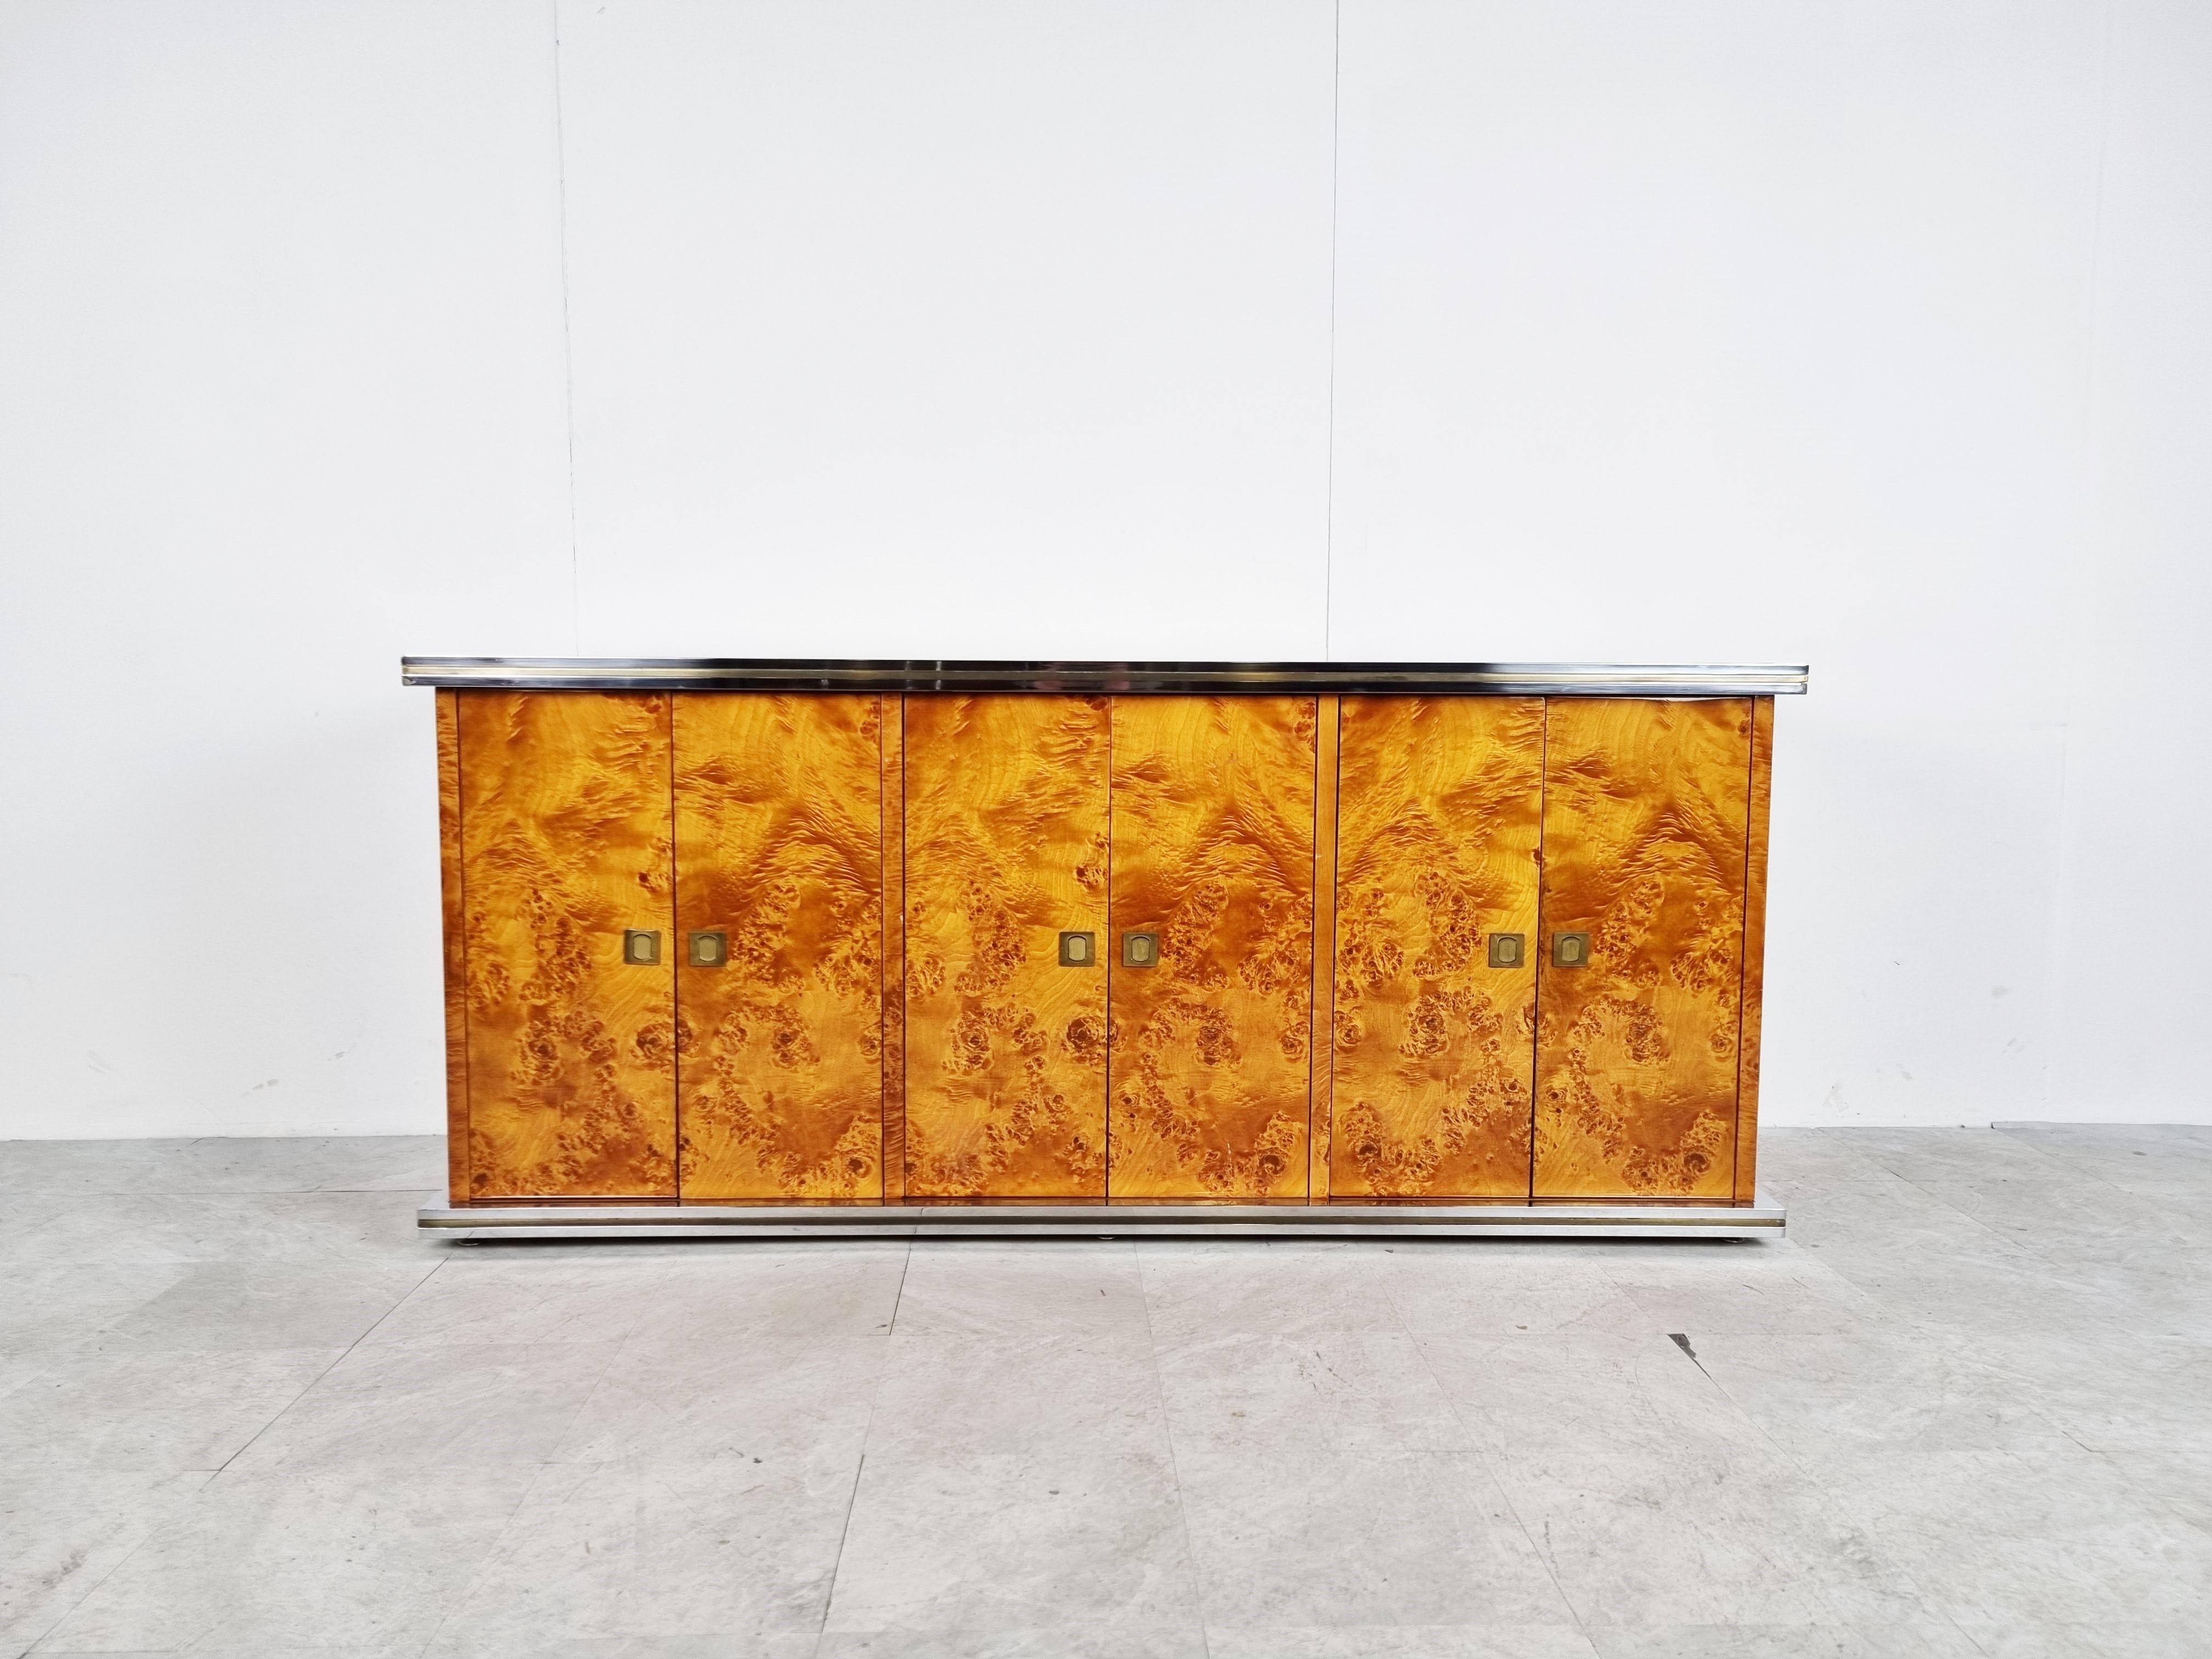 Rare burl veneer credenza designed by luxury/glamour furniture designer Willy Rizzo.

It features 6 doors revealing plenty of storage space

The credenza is made of high quality materials and has a great 1970s - 1980s glamourous look.

It